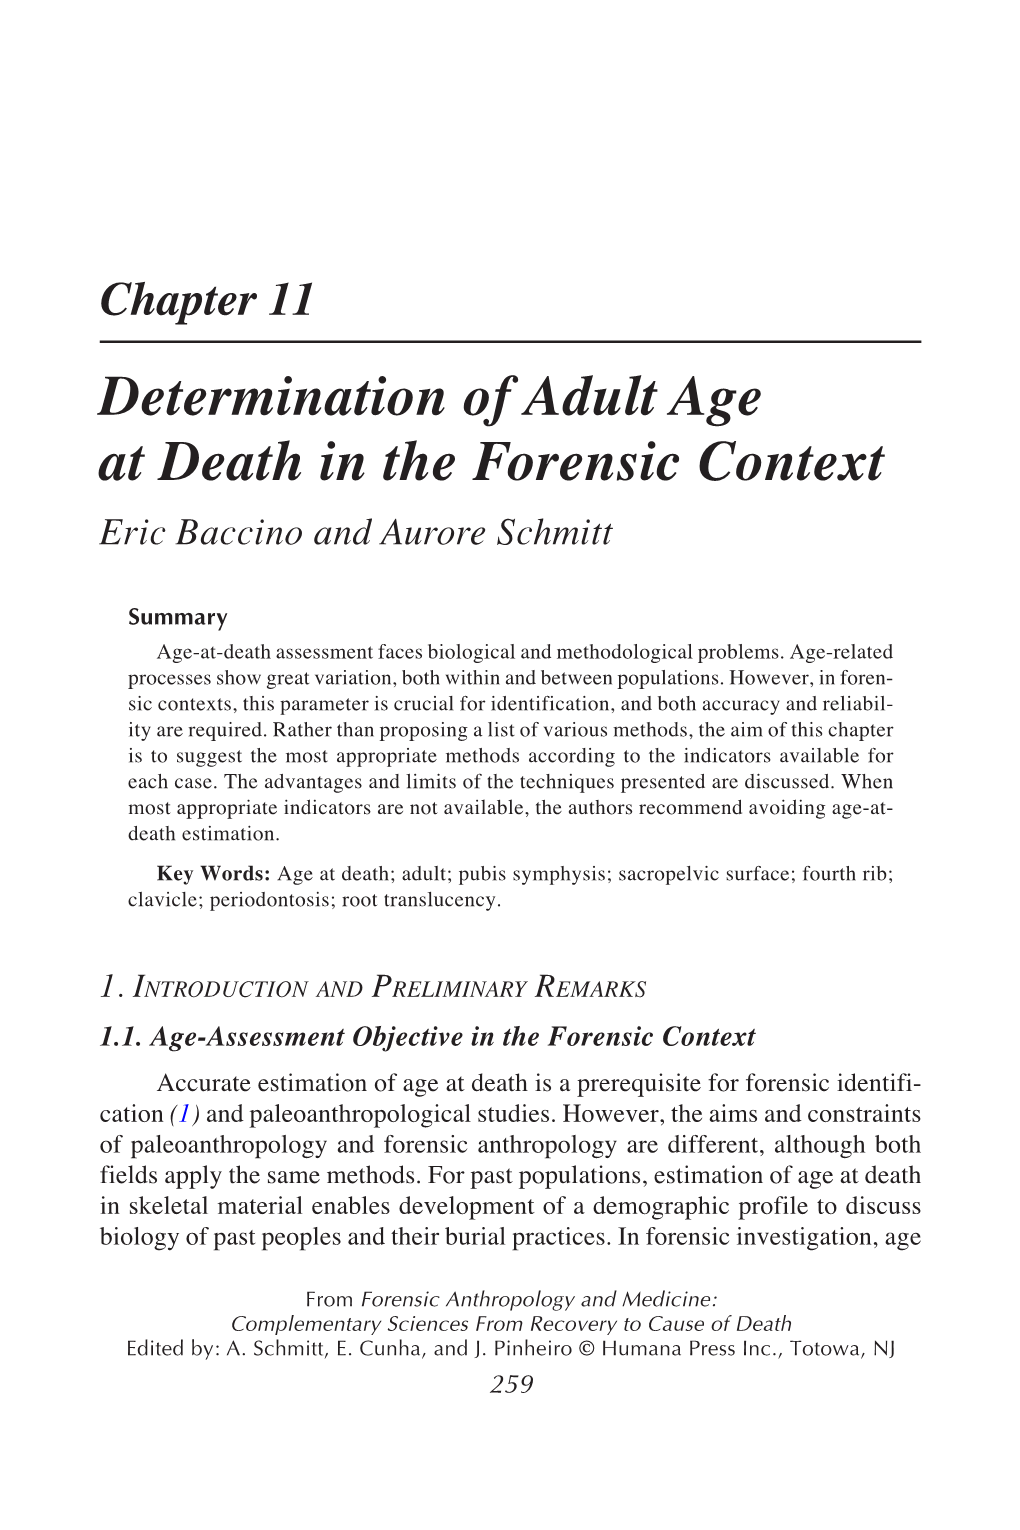 Determination of Adult Age at Death in the Forensic Context Eric Baccino and Aurore Schmitt